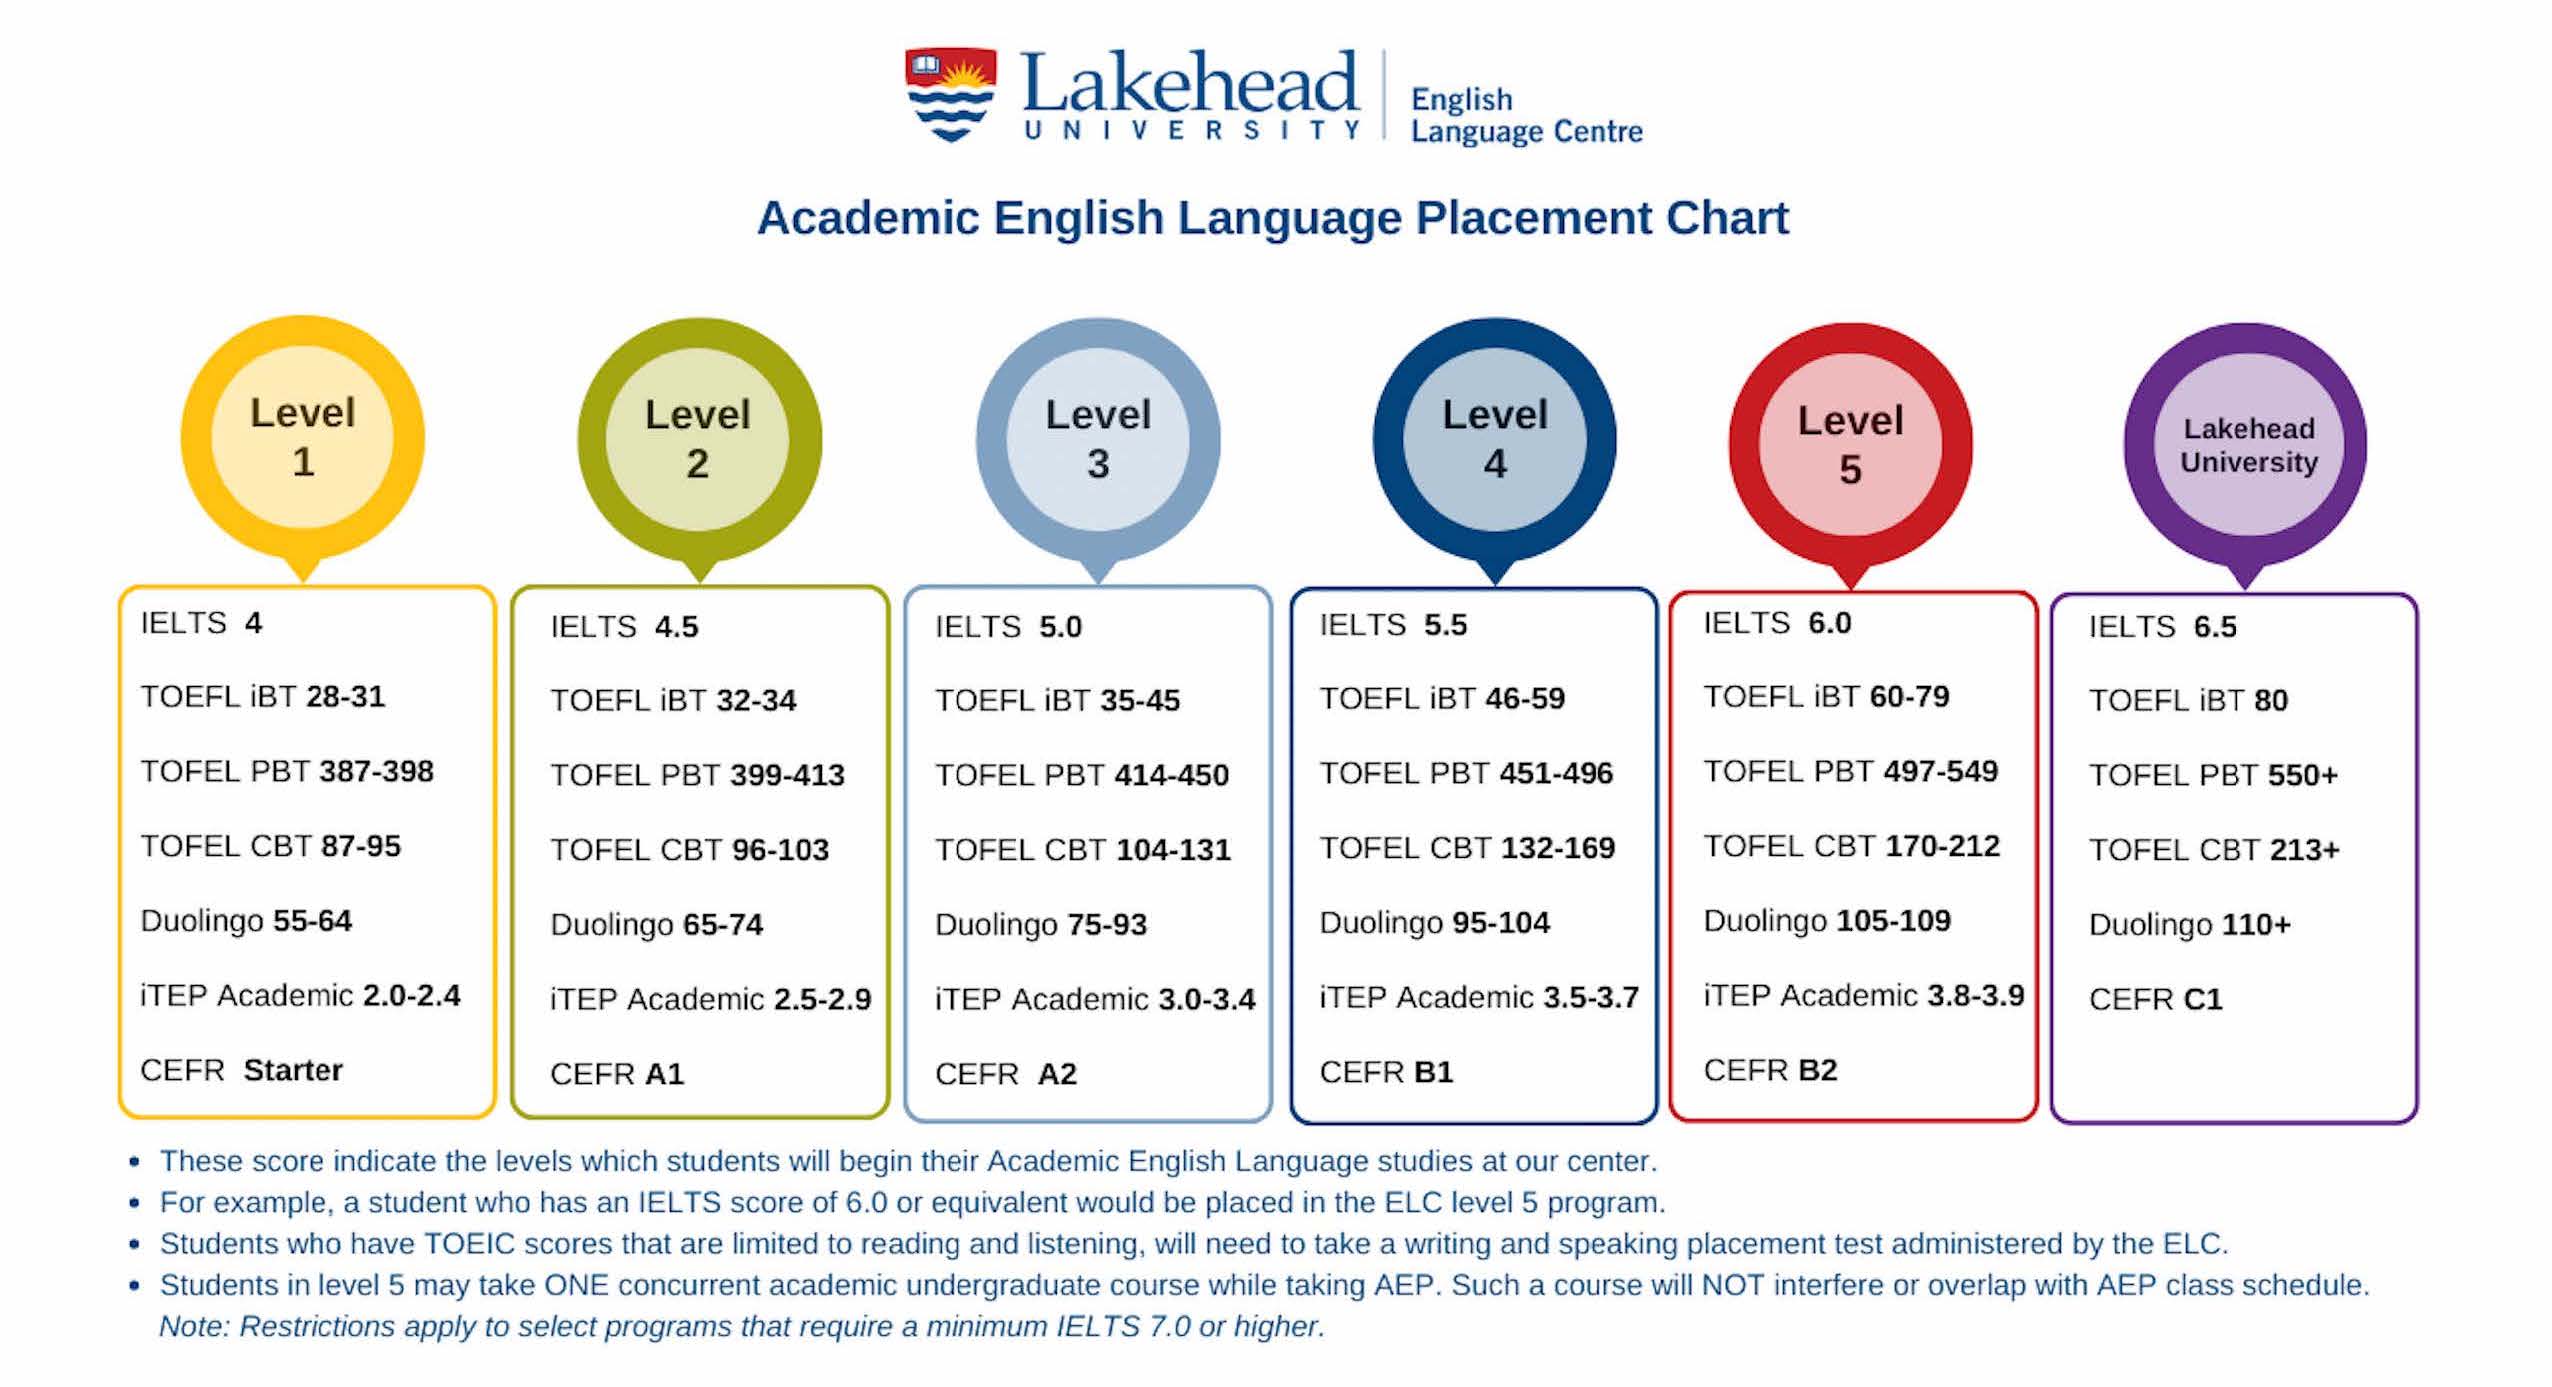 A chart displaying the different placement levels of Lakehead's Academics English Program